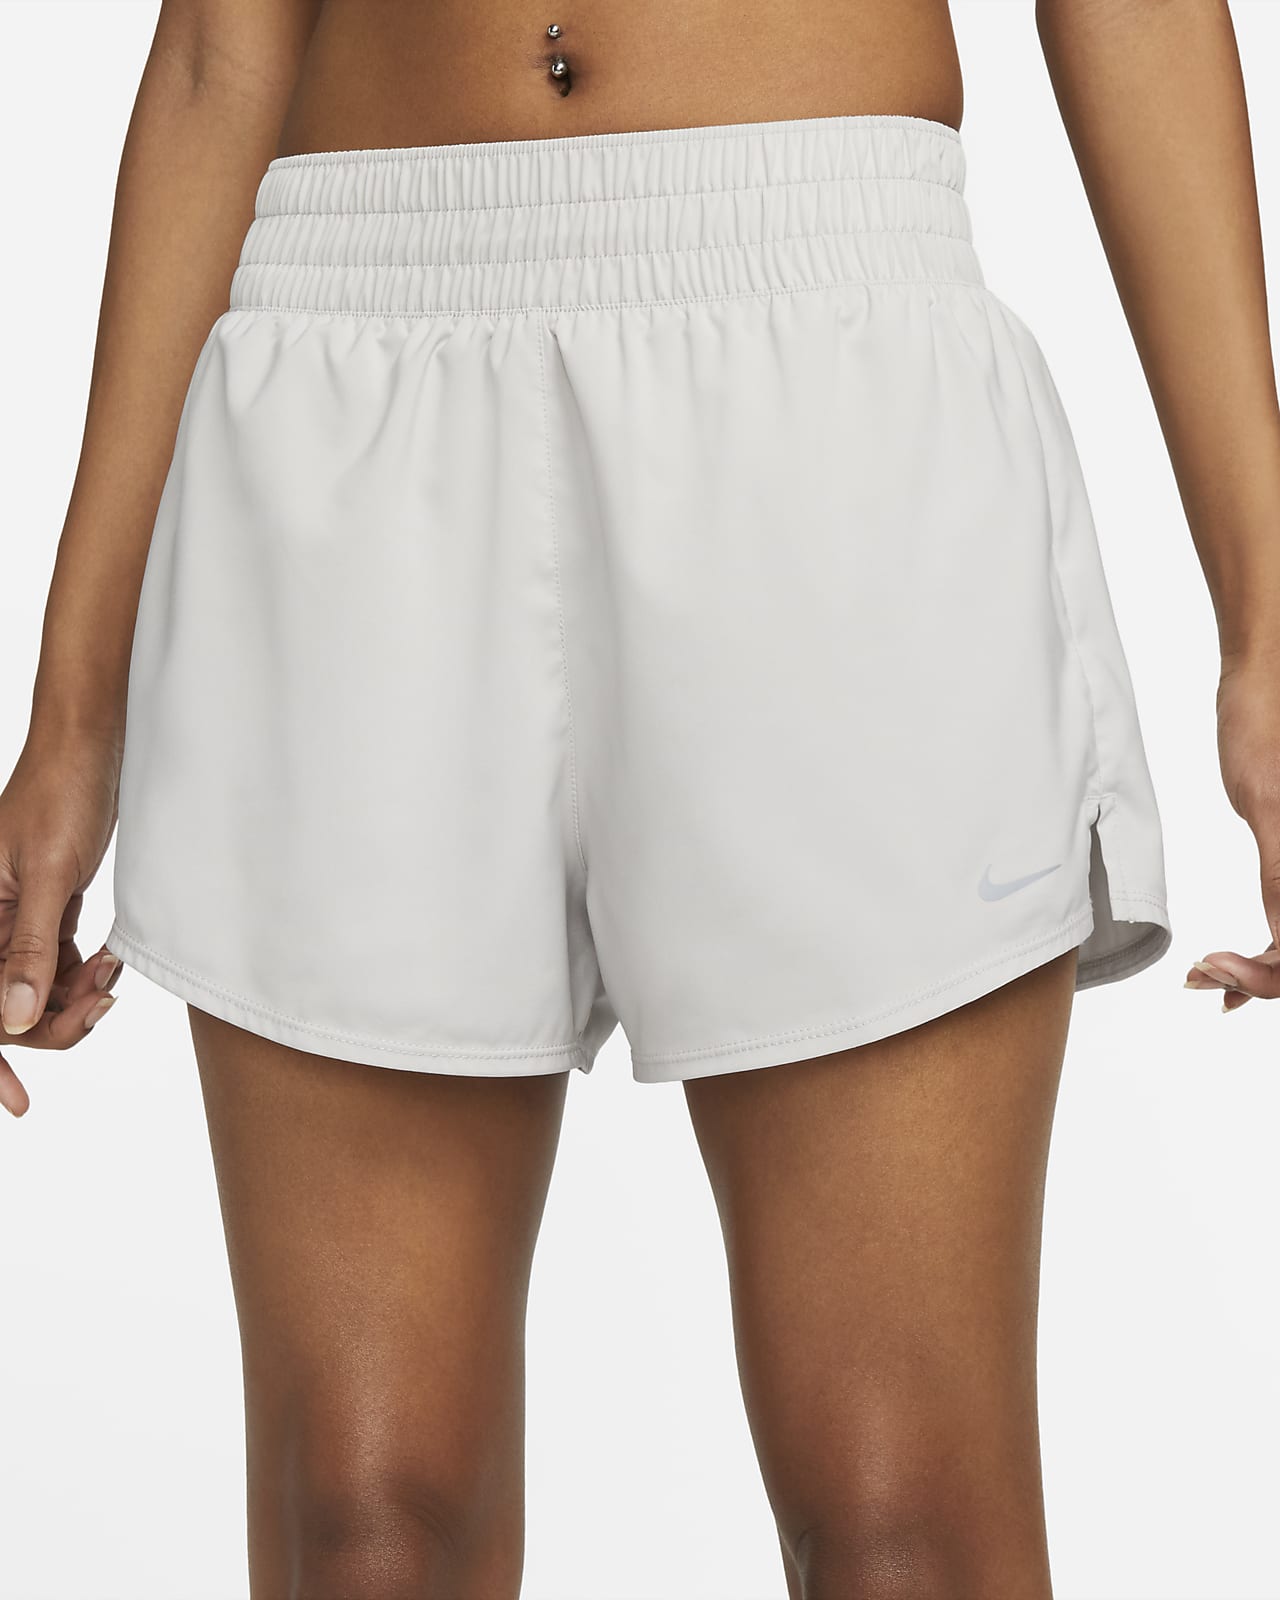 Shop One Women's Dri-FIT Mid-Rise 8cm (approx.) 2-in-1 Shorts